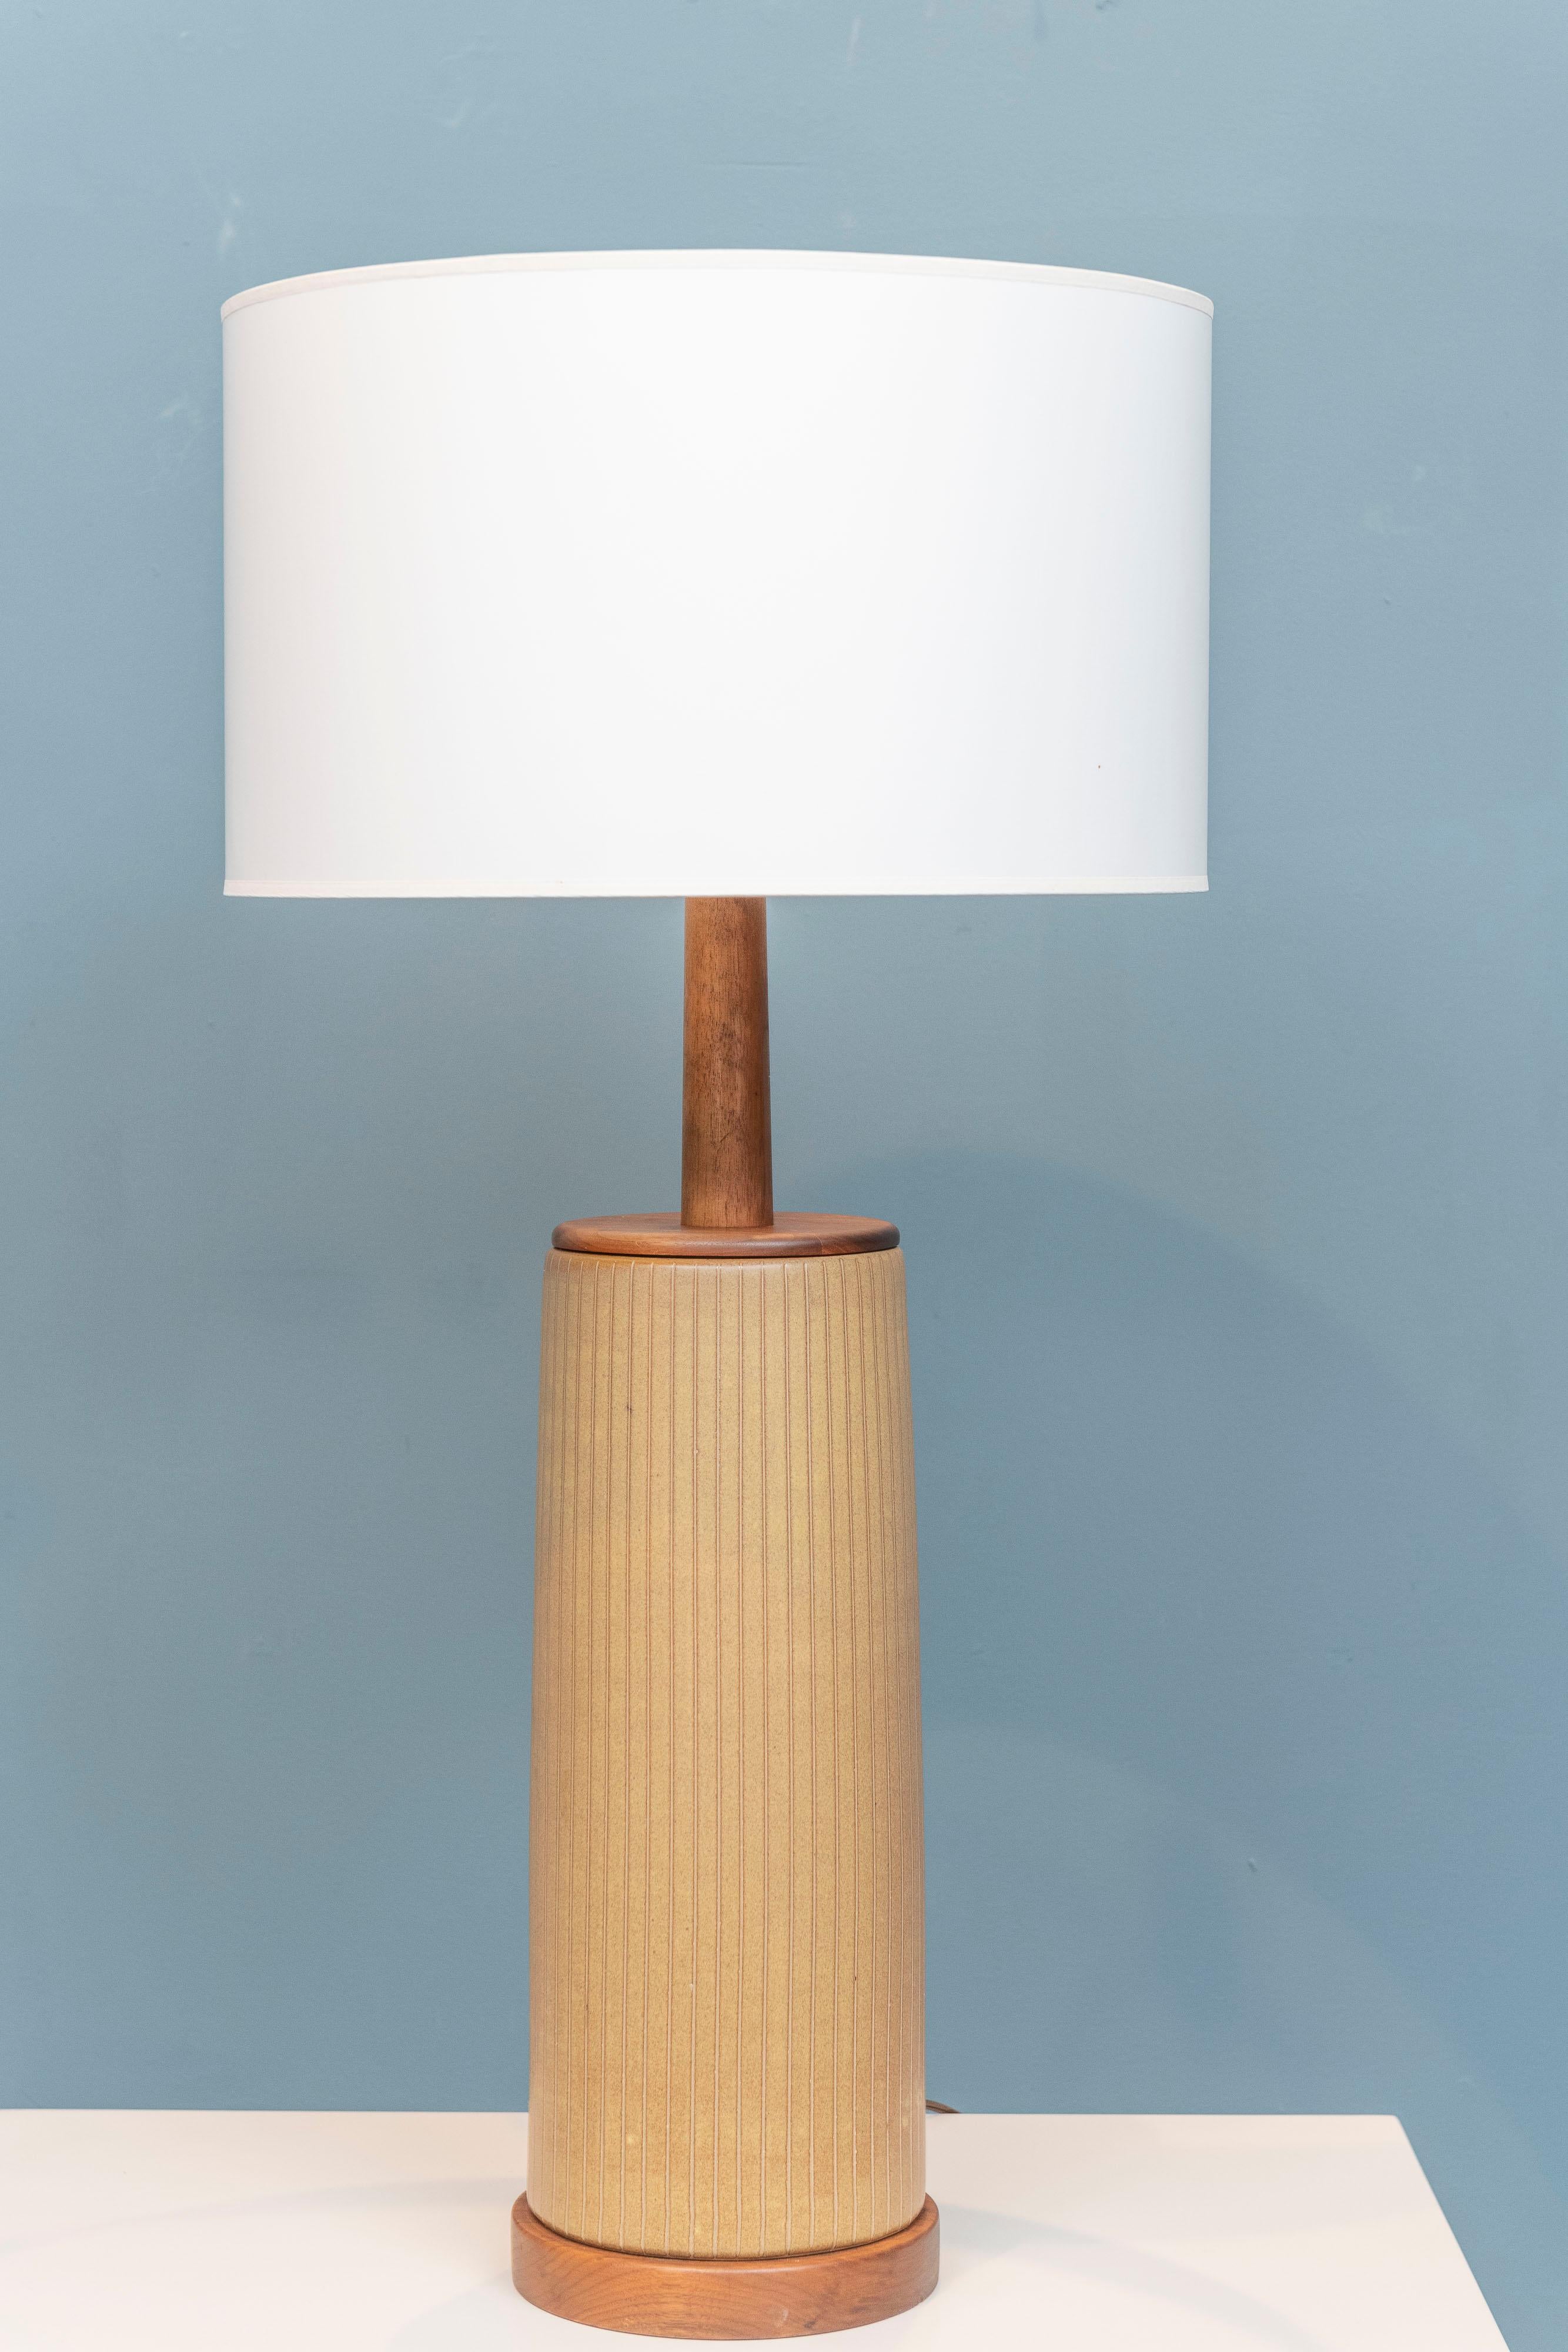 Gordon & Jane Martz design large table lamp for Marshall Studios. Unusual model with a walnut base, collar and neck with the original finial. Having an encized repeating pattern of vertical lines, ready to enjoy.